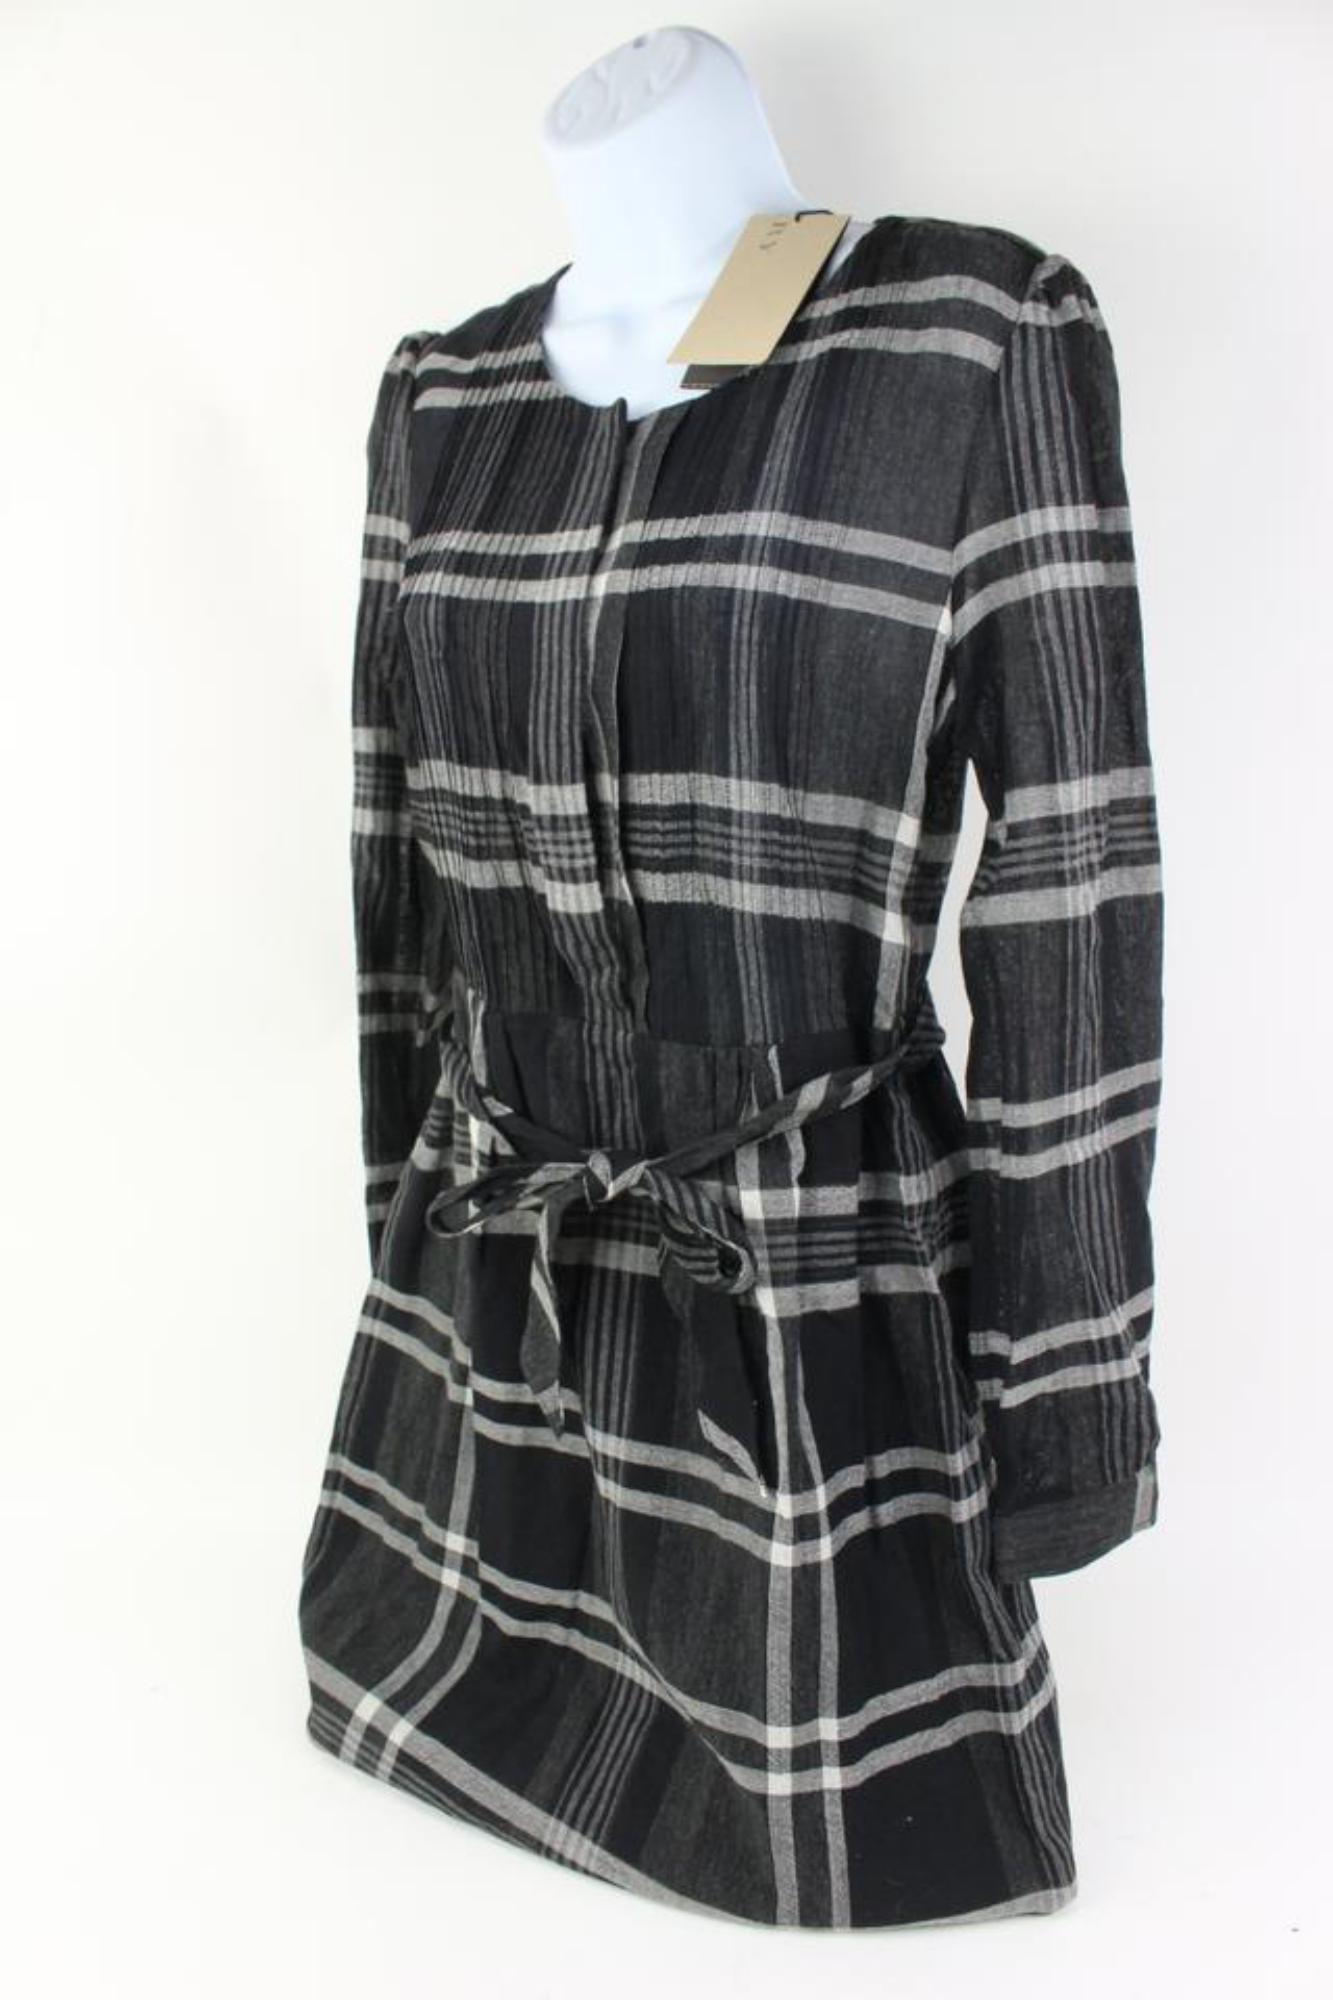 Burberry Brit Size 10 Black Nova Check Dress s331b38
Date Code/Serial Number: CNALLASIPAN 3976451/65E
Made In: China
Measurements: Length:  21